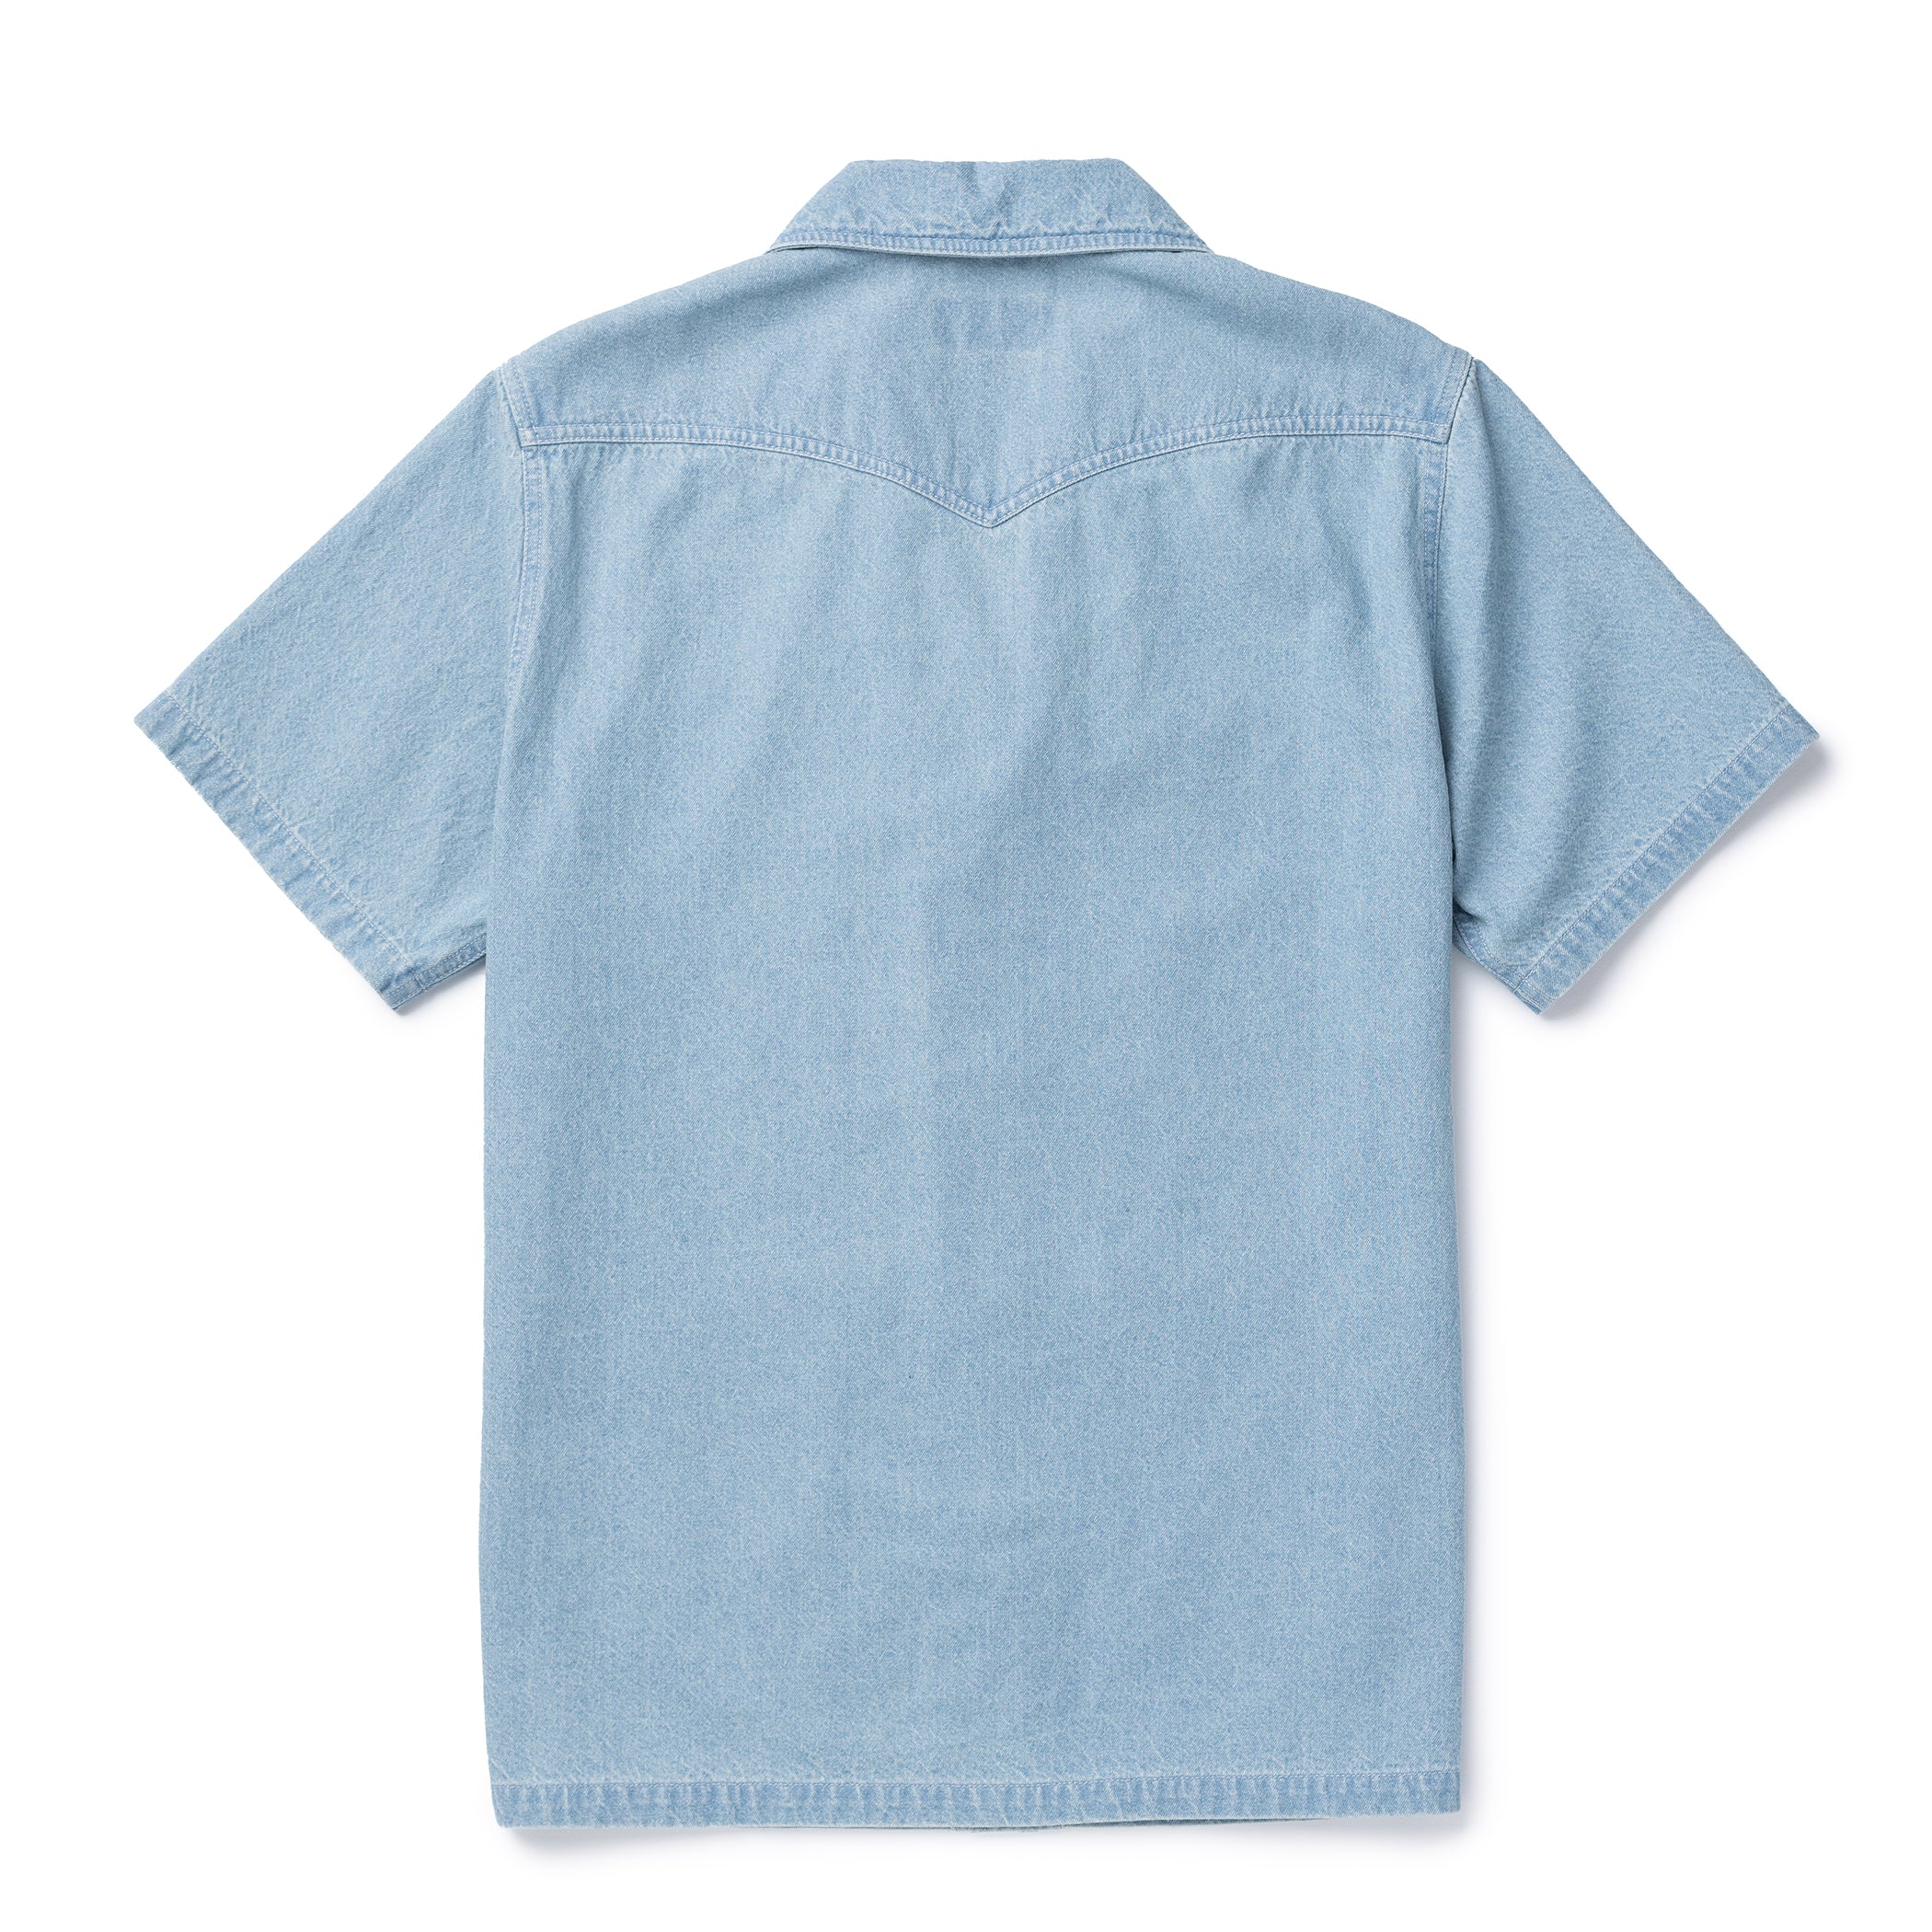 Southpaw Whippersnapper Chambray